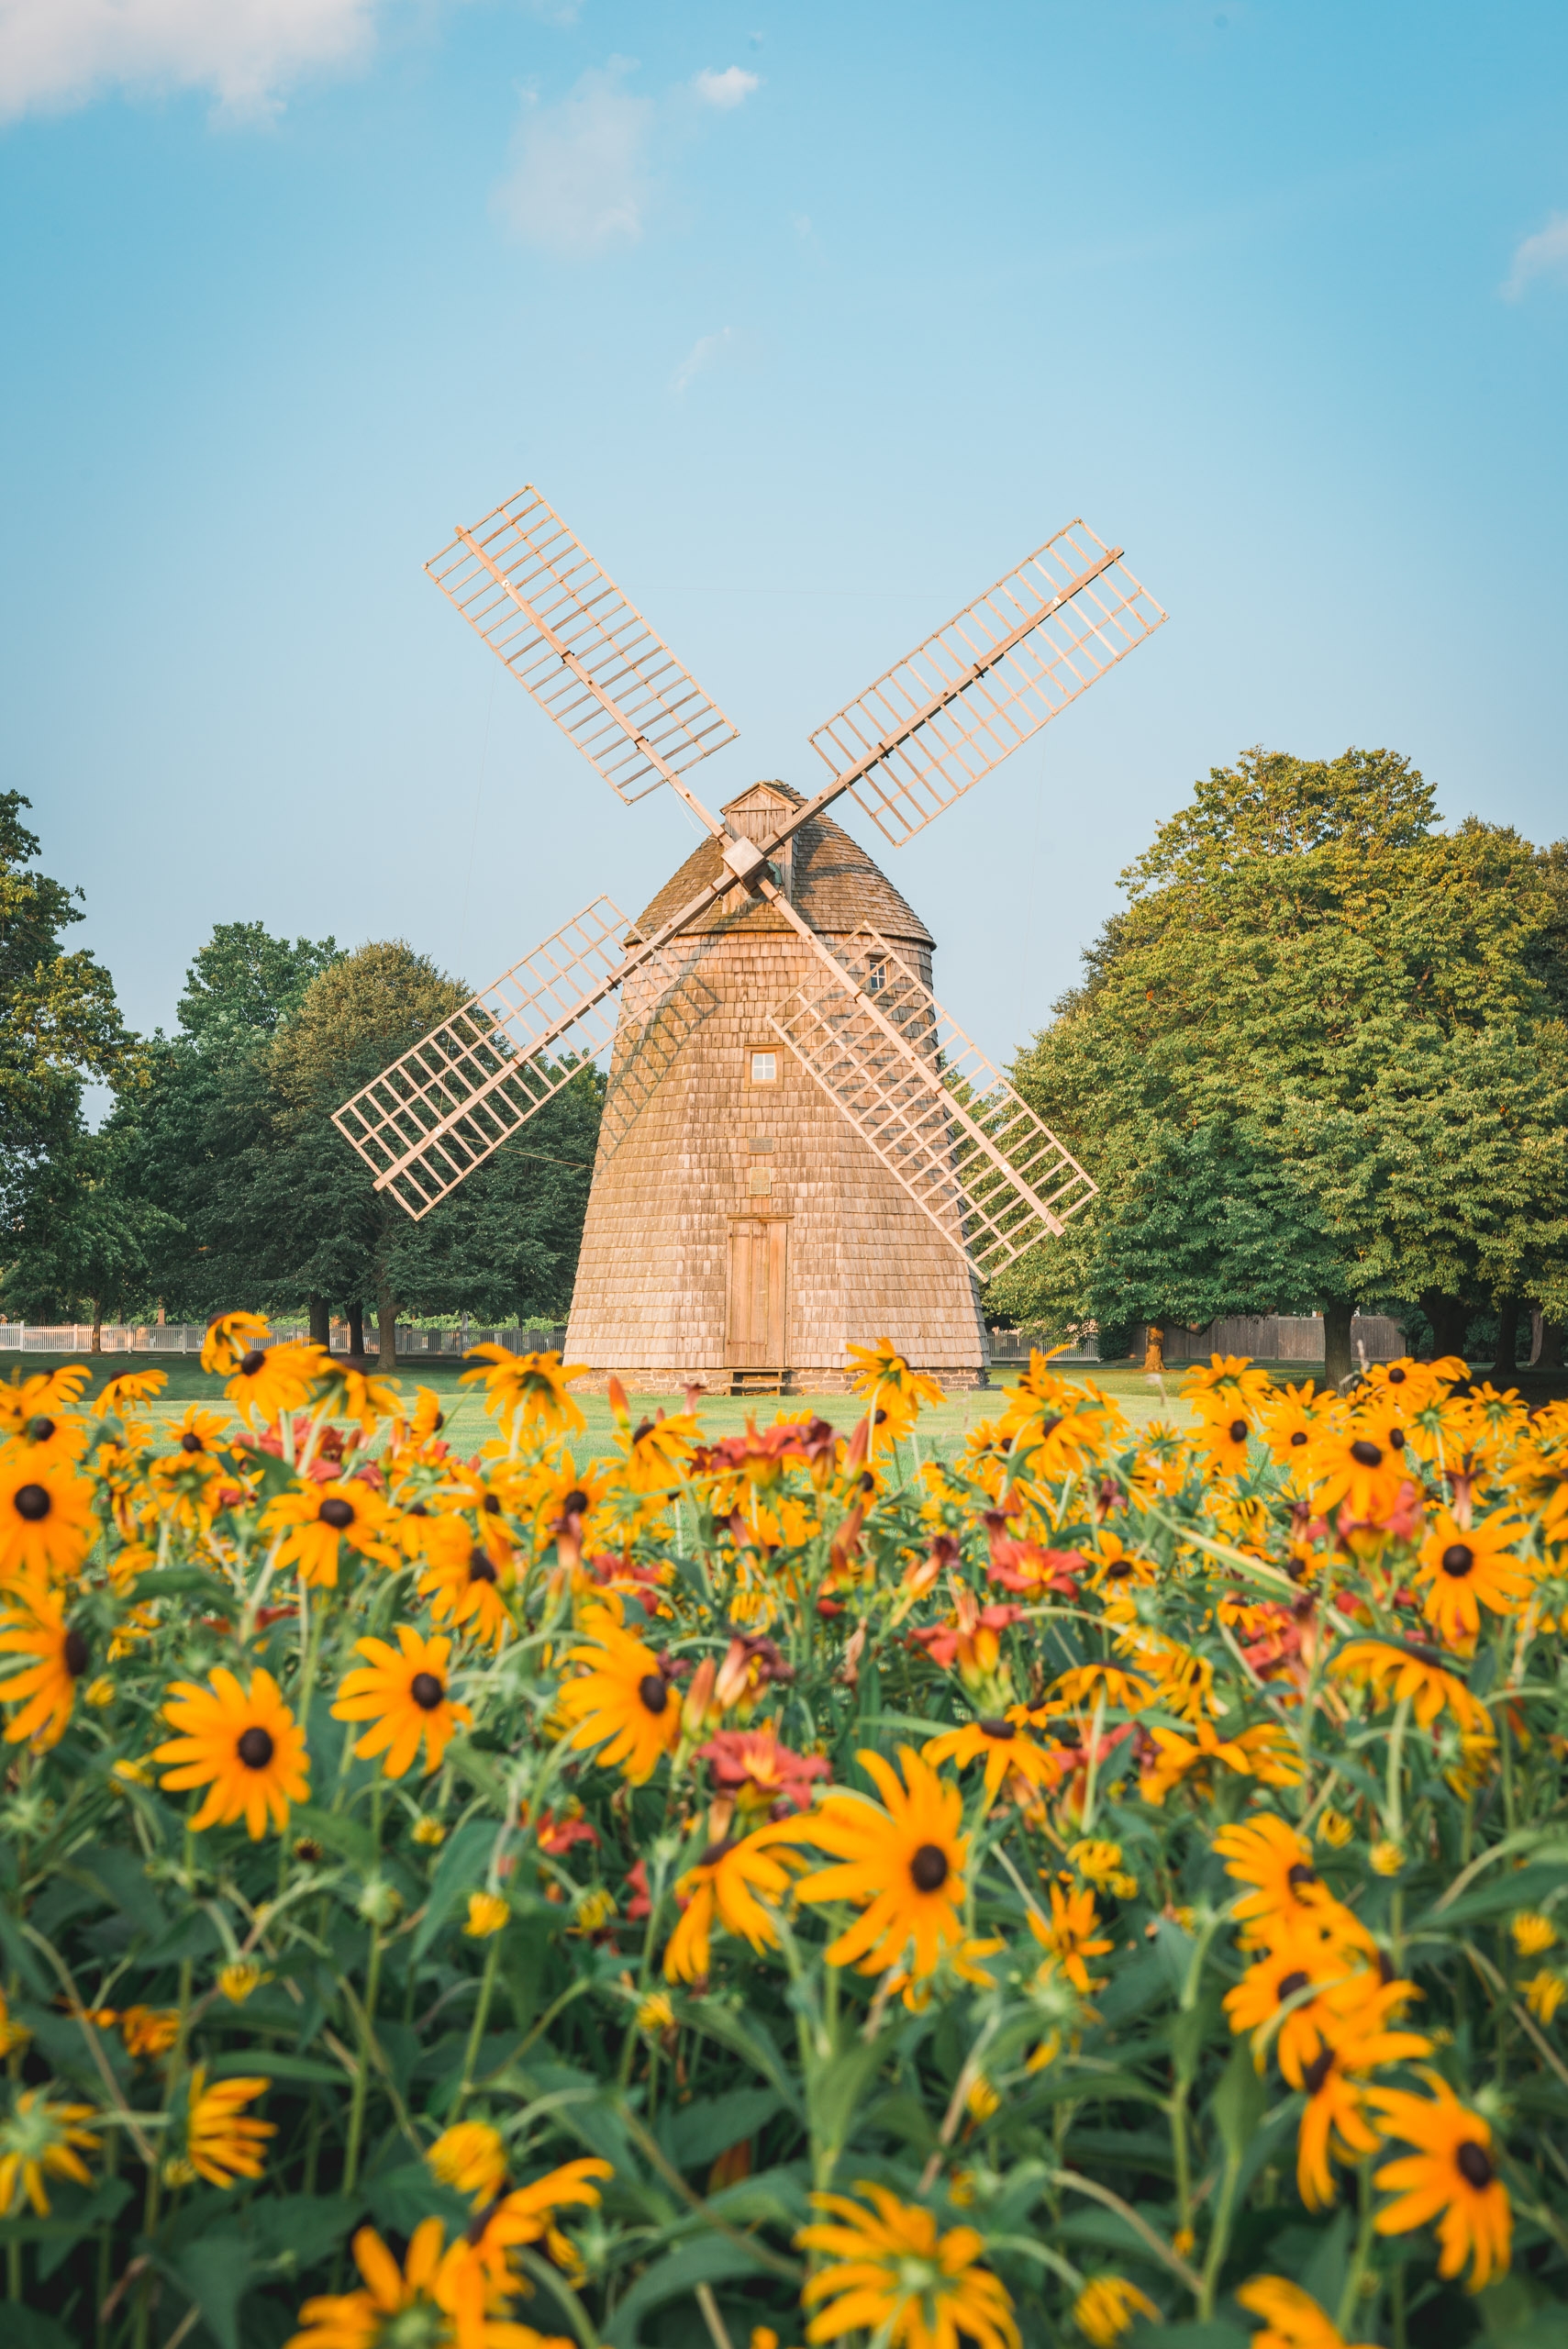 The Windmill and the Flowers